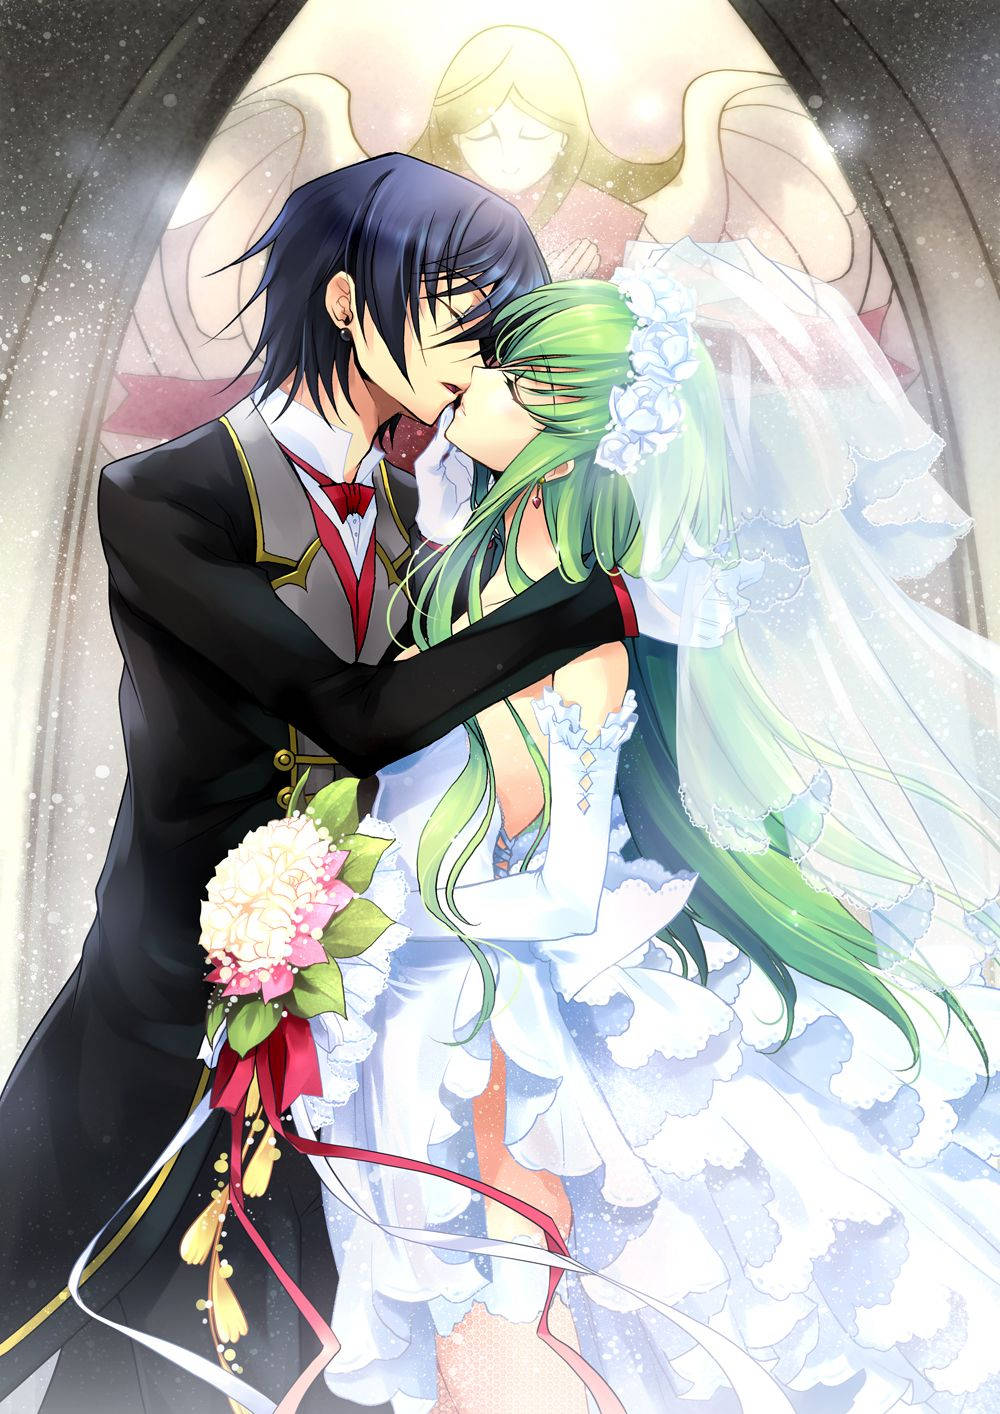 Lelouch And Cc Anime Couple Kiss Wallpaper